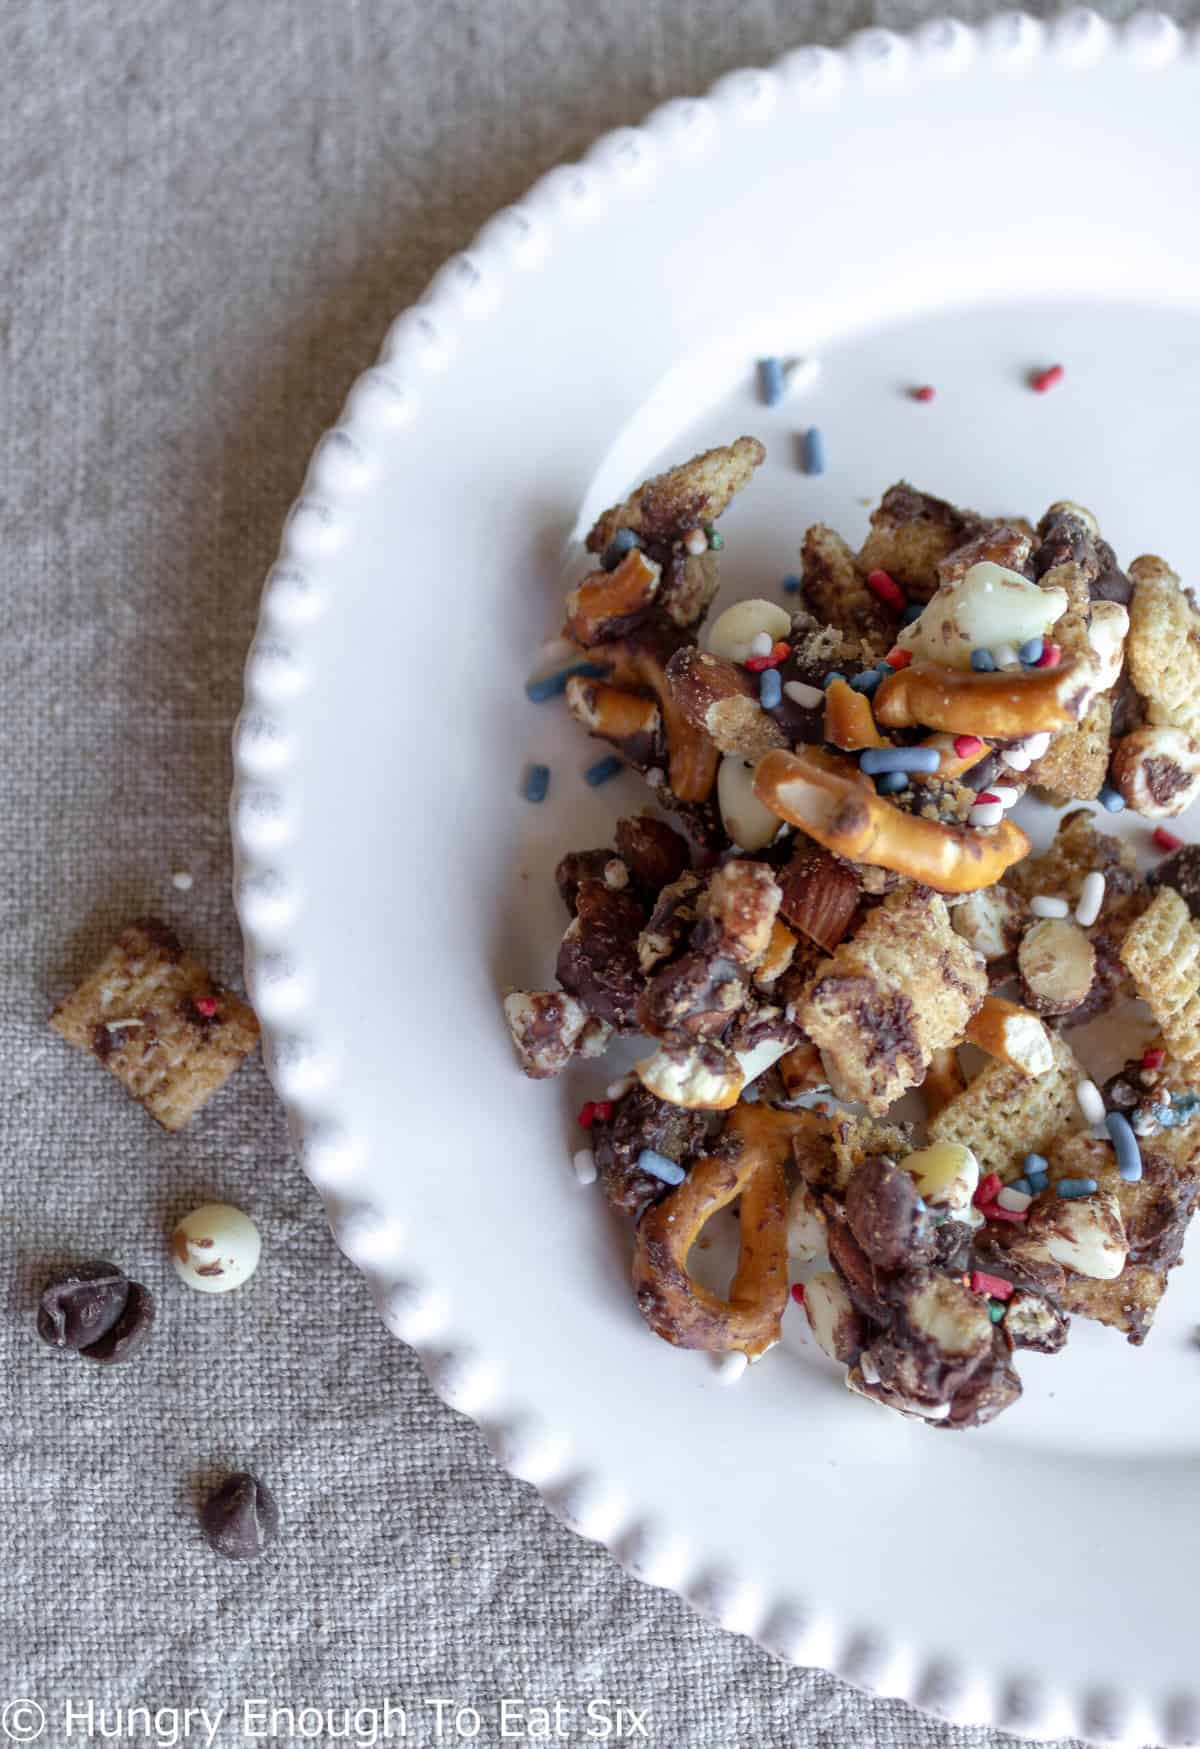 Snack mix with pretzels, cereal, and chocolate.